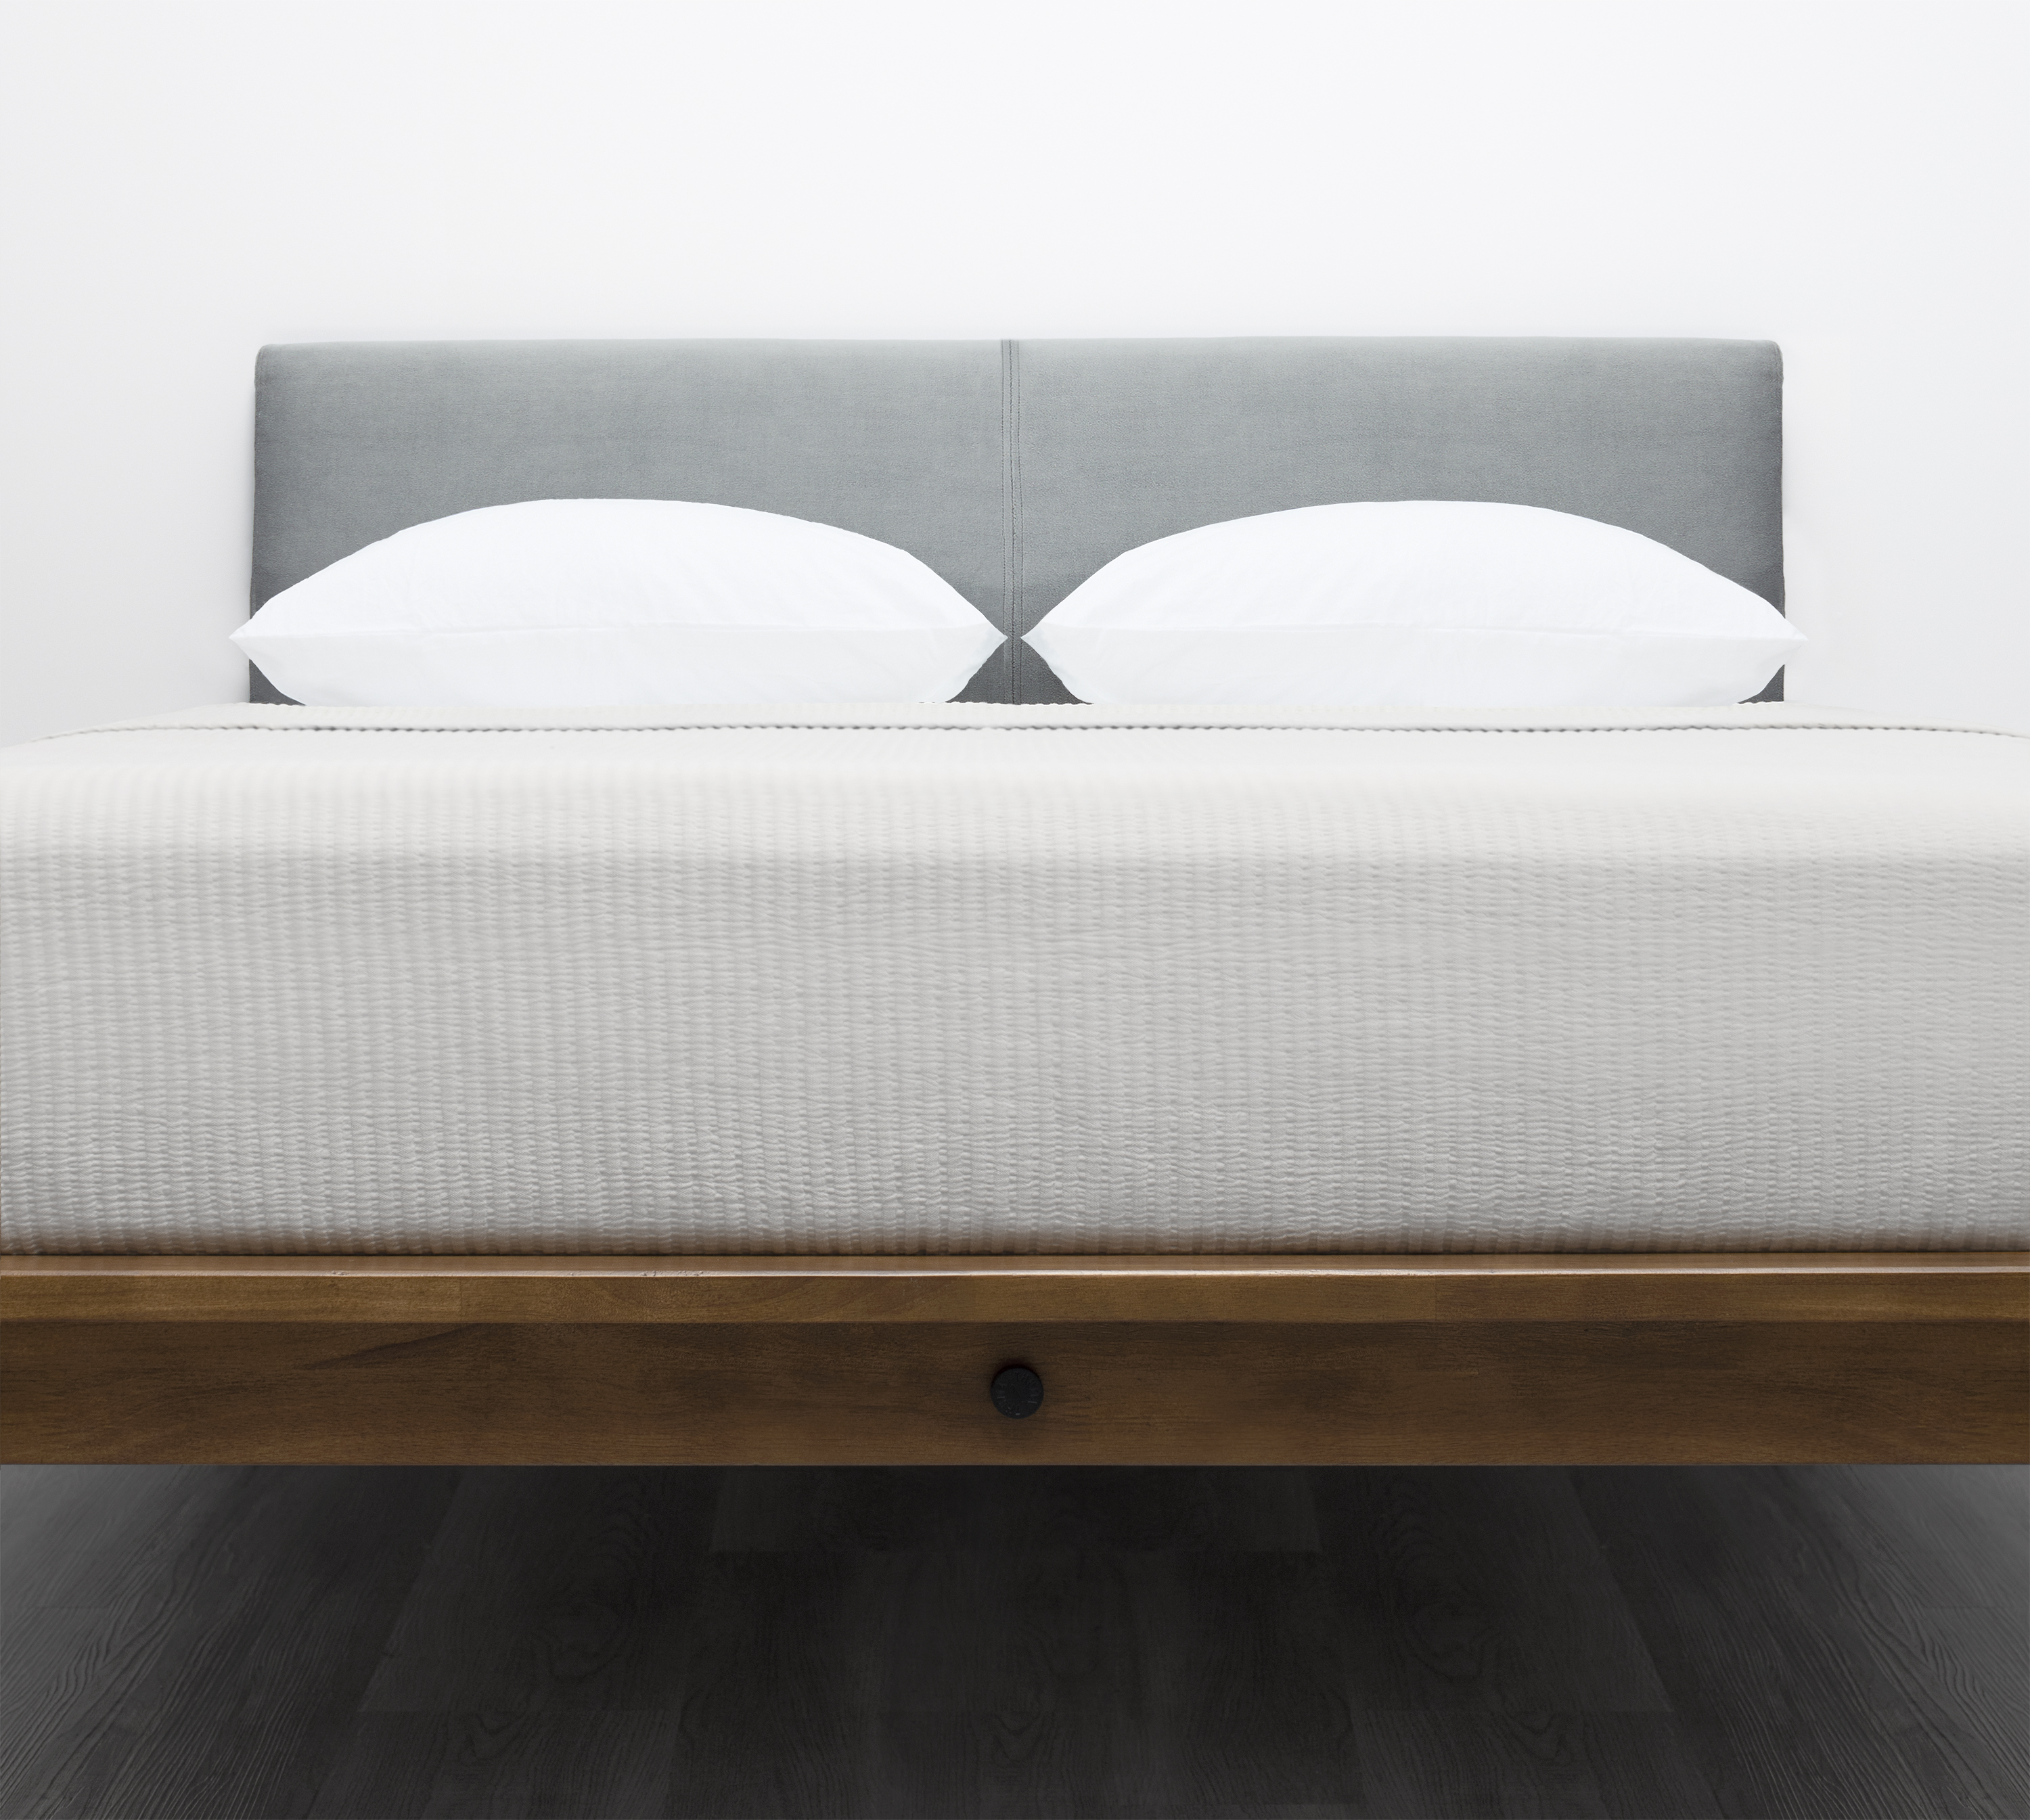 The perfect platform - The Bed - Thuma